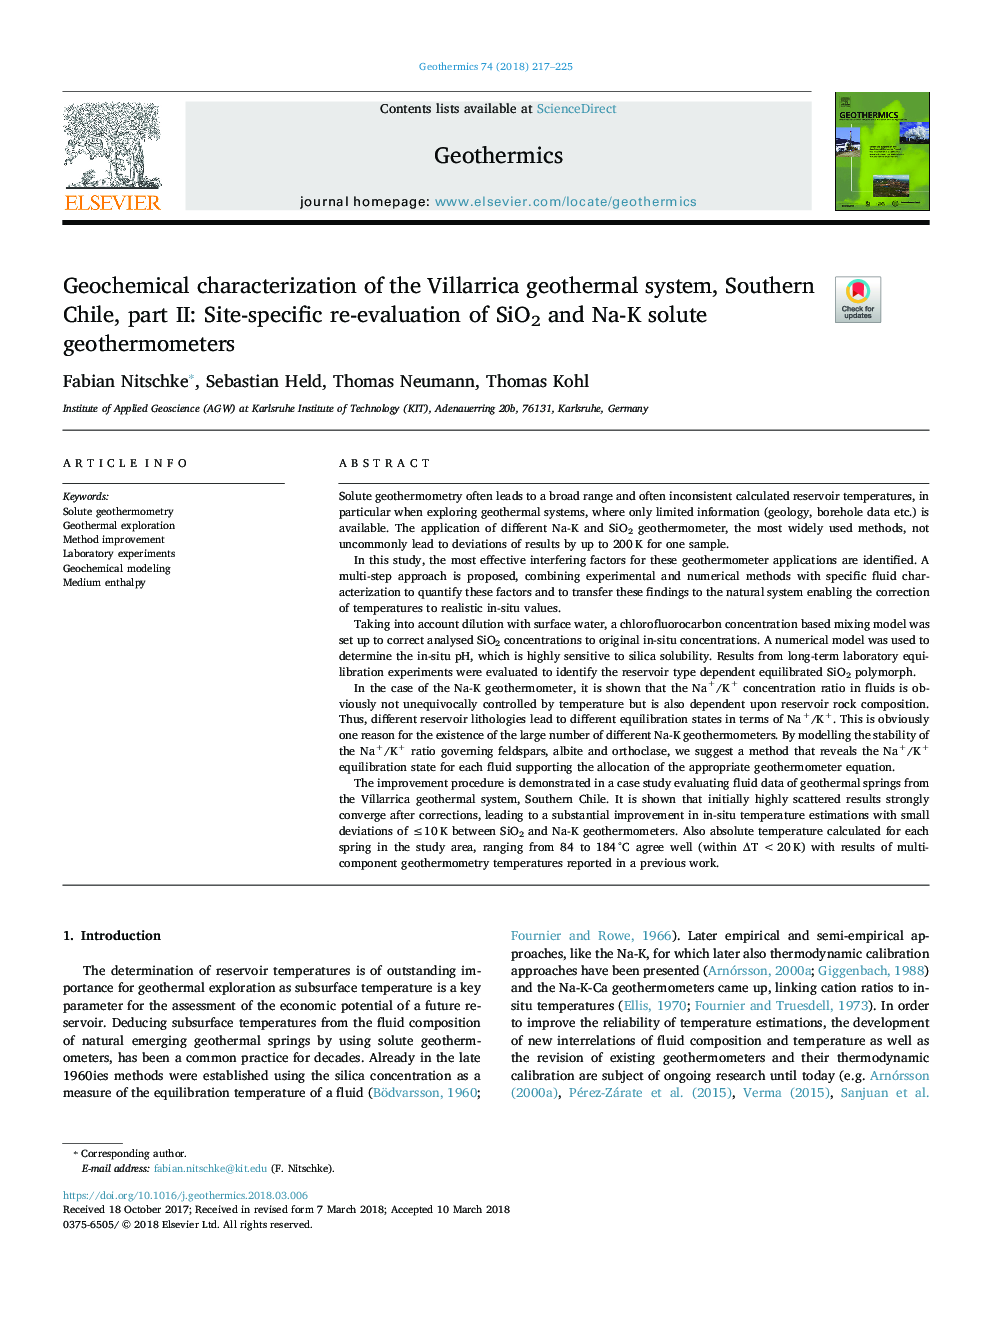 Geochemical characterization of the Villarrica geothermal system, Southern Chile, part II: Site-specific re-evaluation of SiO2 and Na-K solute geothermometers